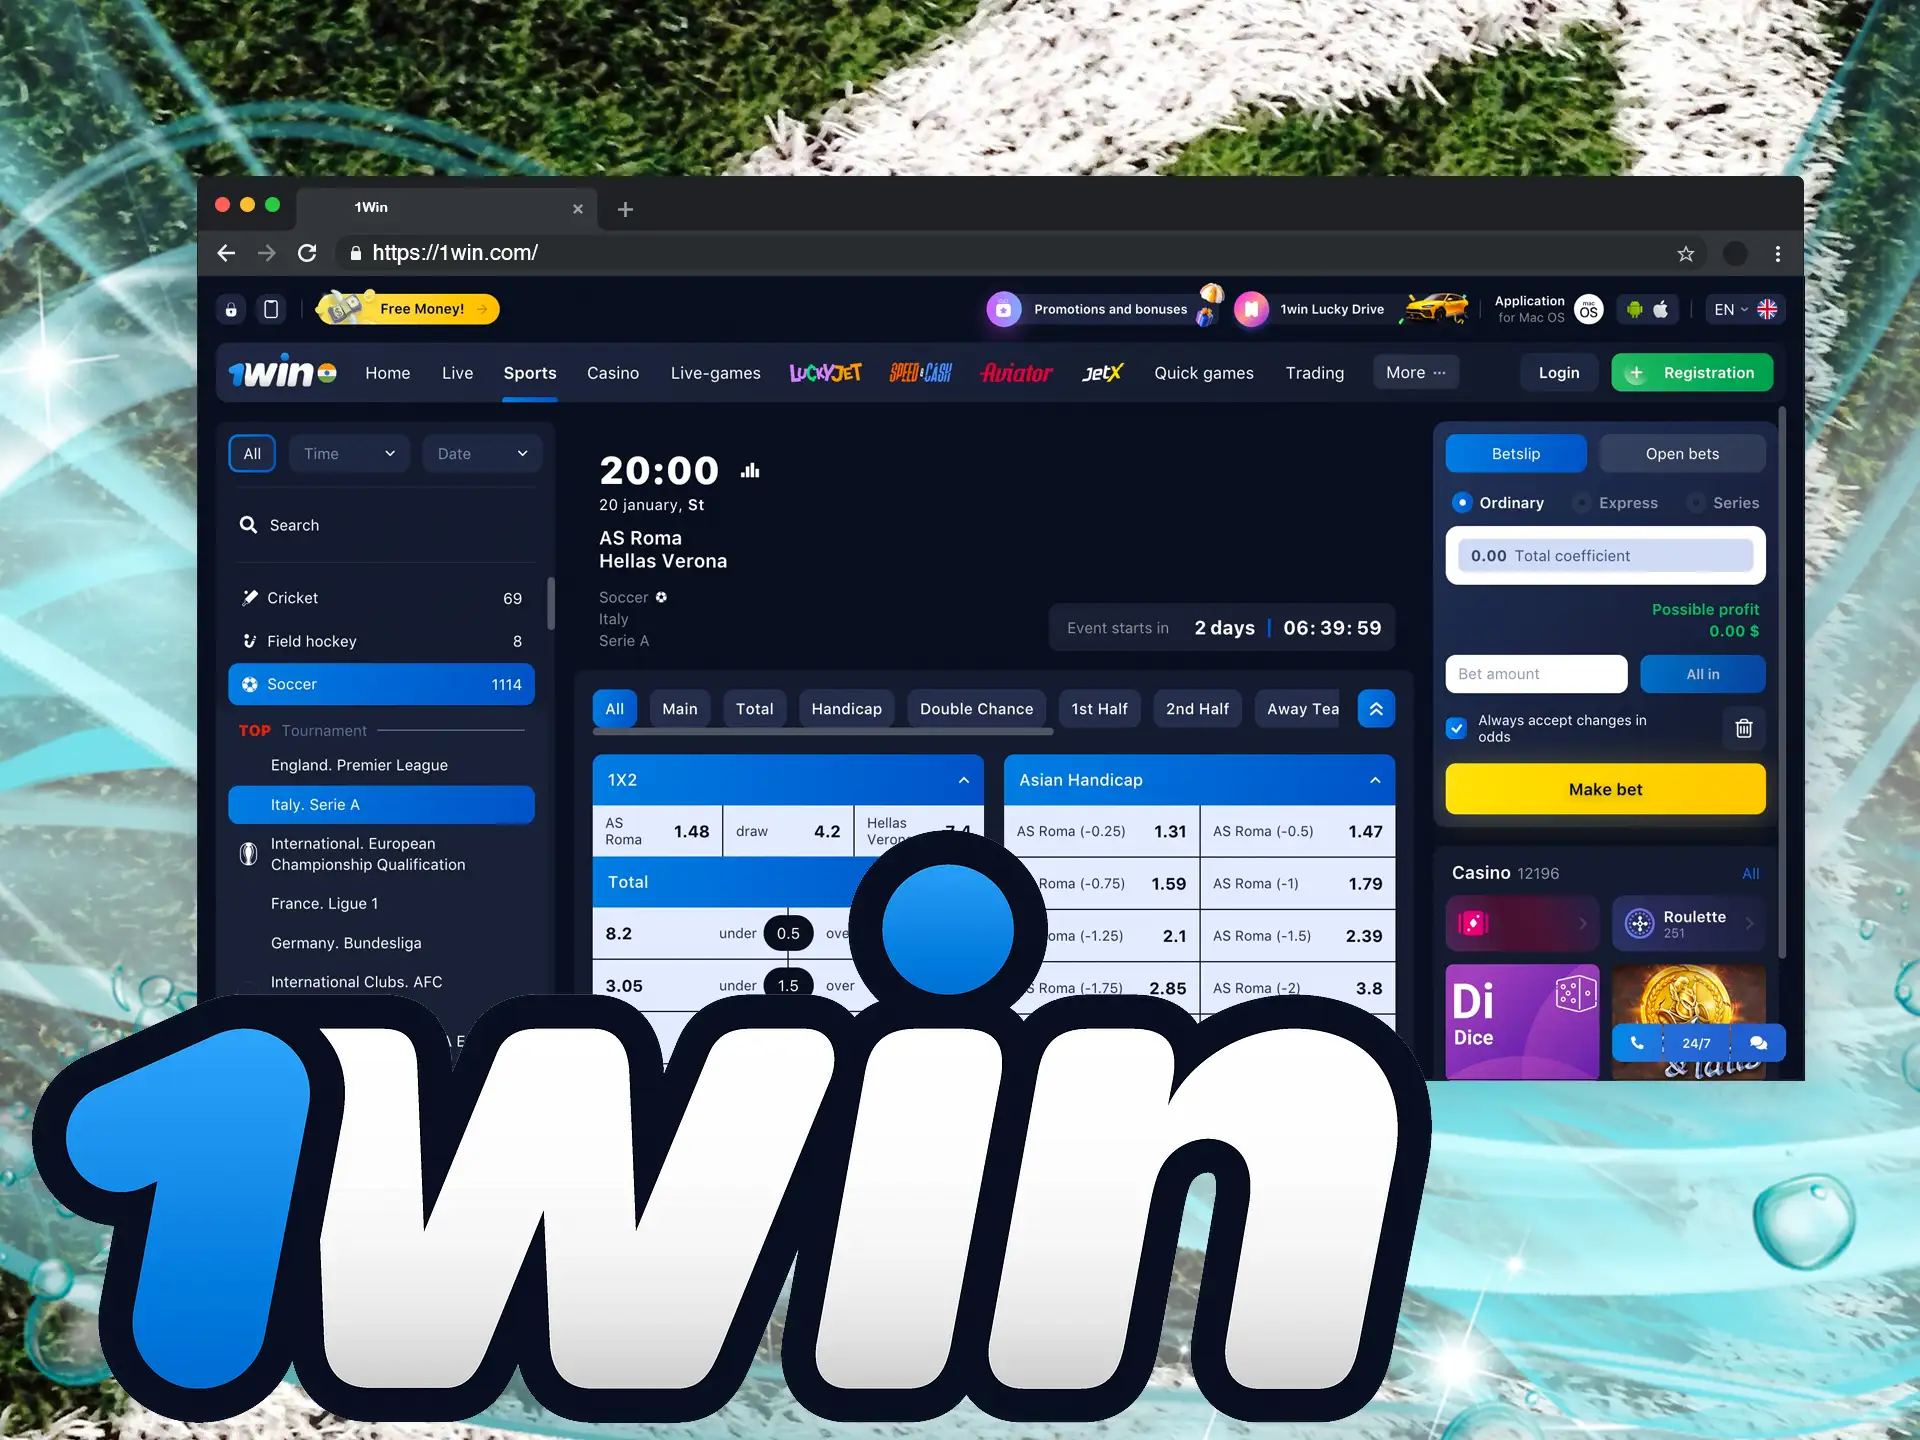 Players from India have a unique opportunity to place real-time bets on the 1Win website.